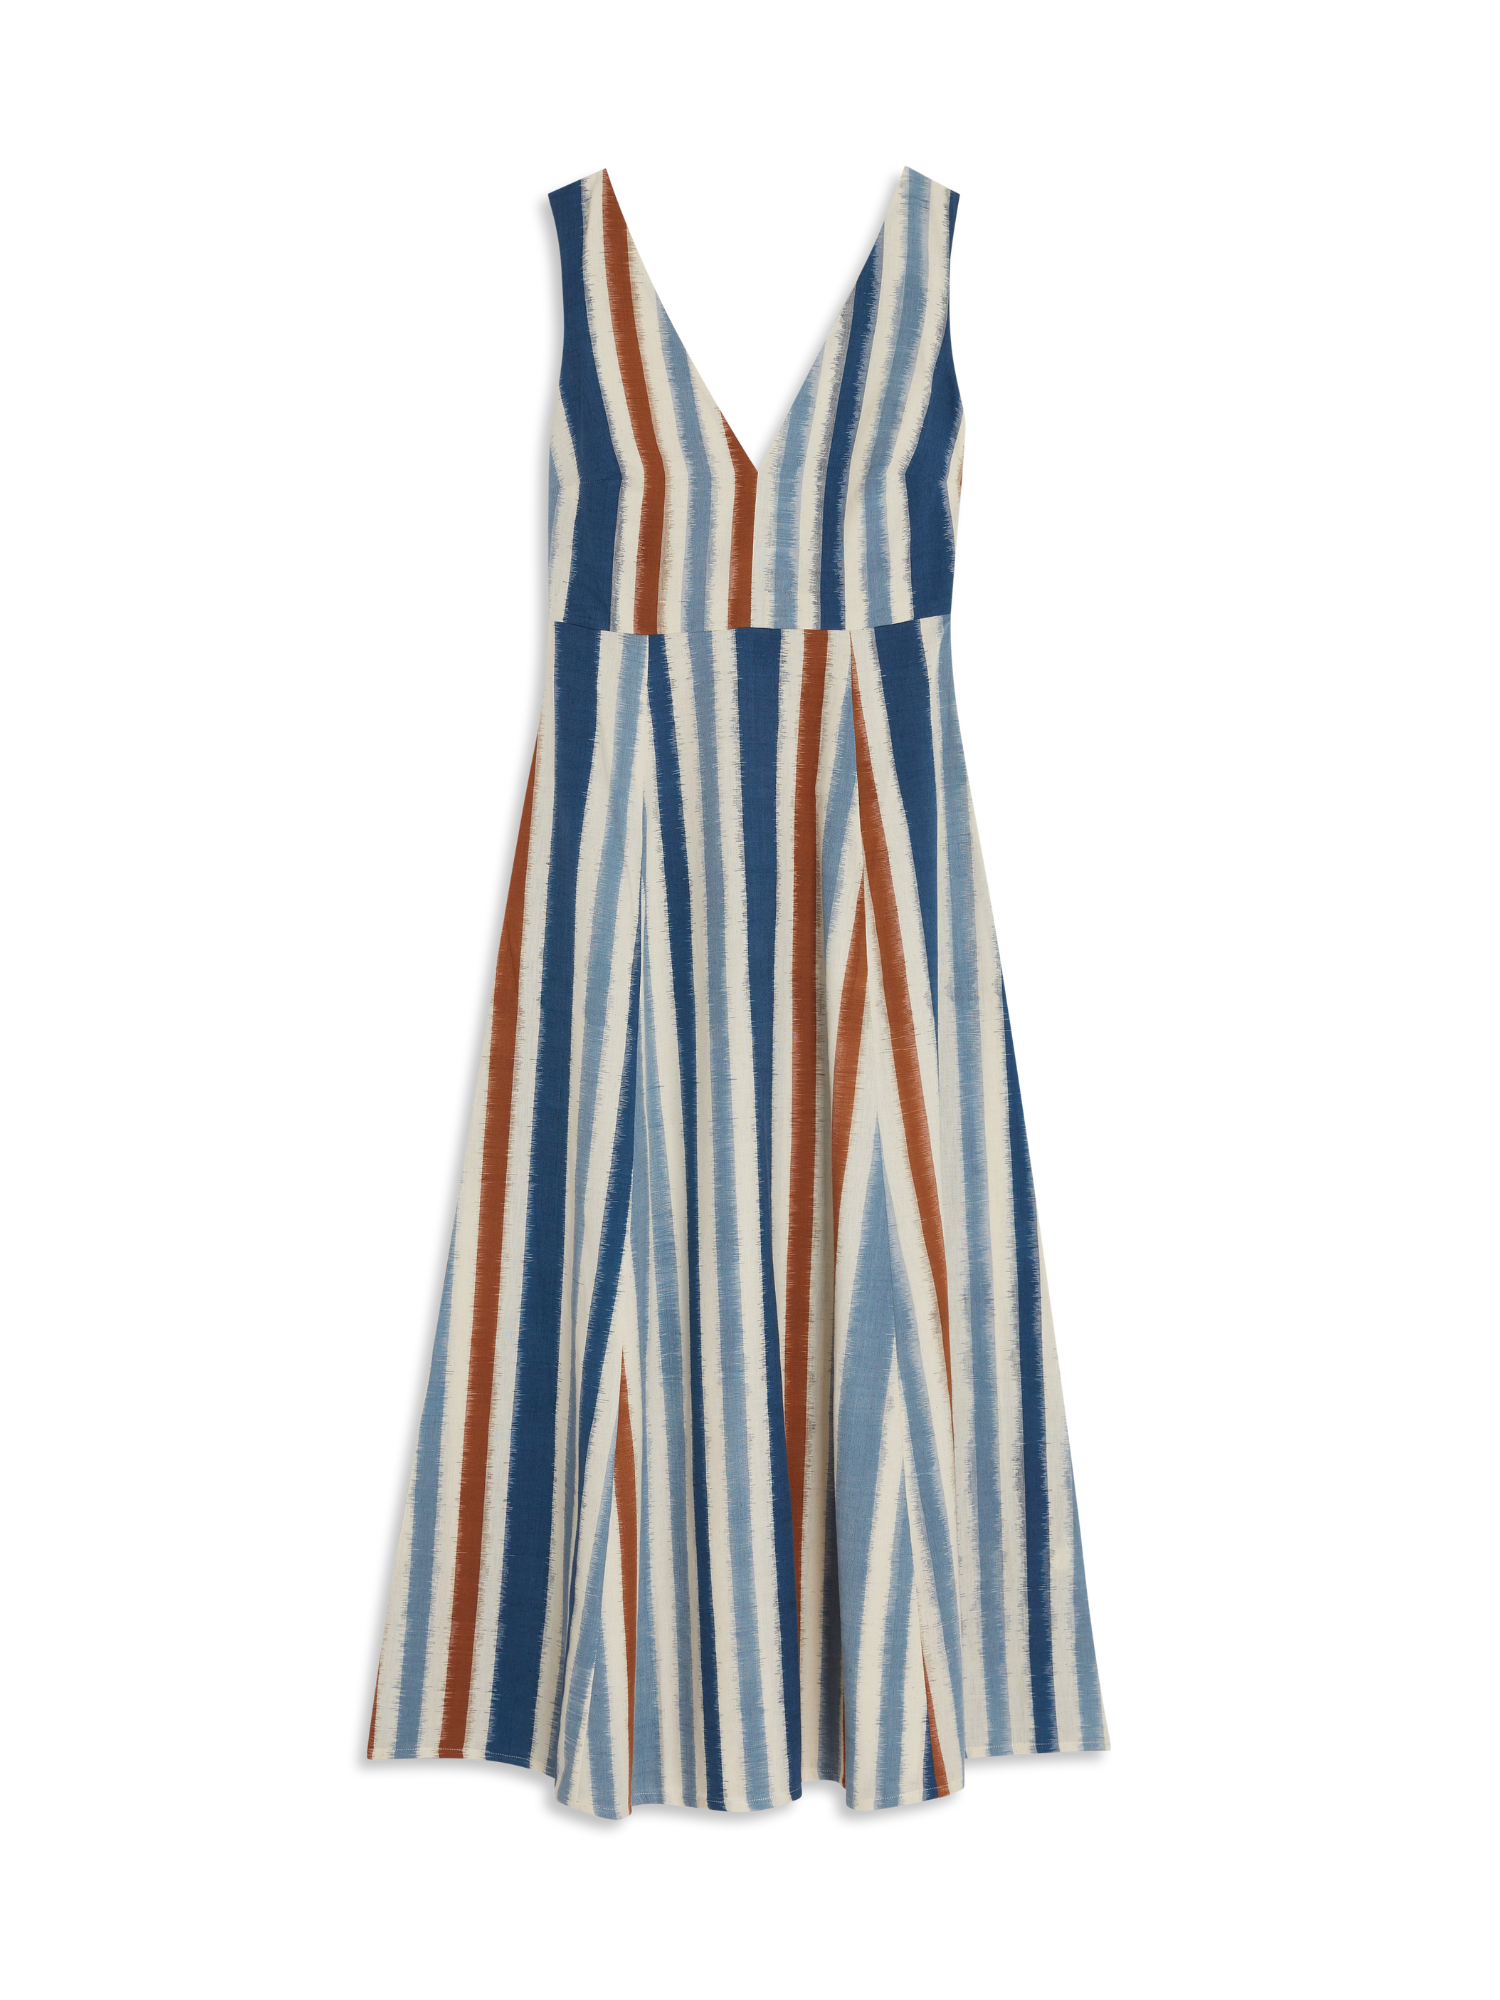 Emporio Sirenuse Nellie Dress in French Stripes Blue